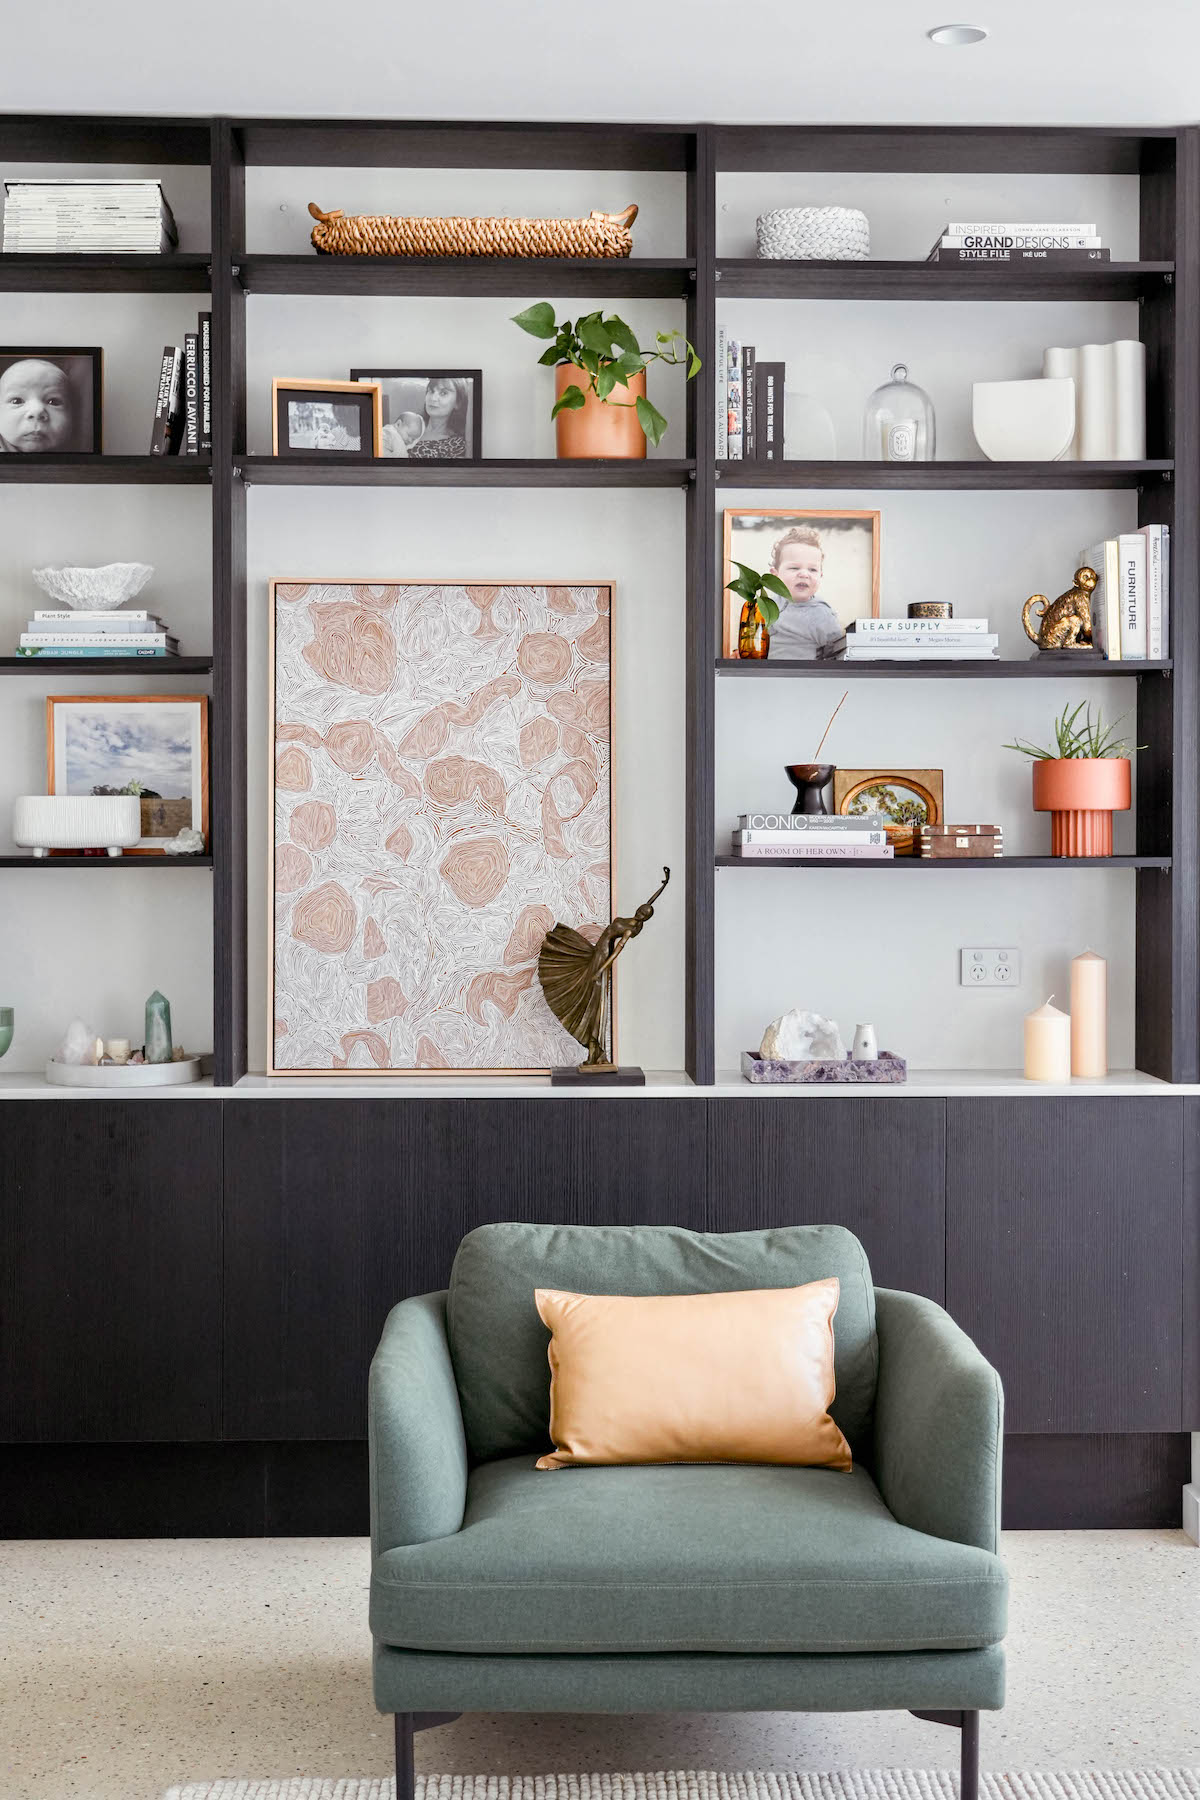 Styling a modern bookshelf with eclectic decor mix vintage decor into a modern home